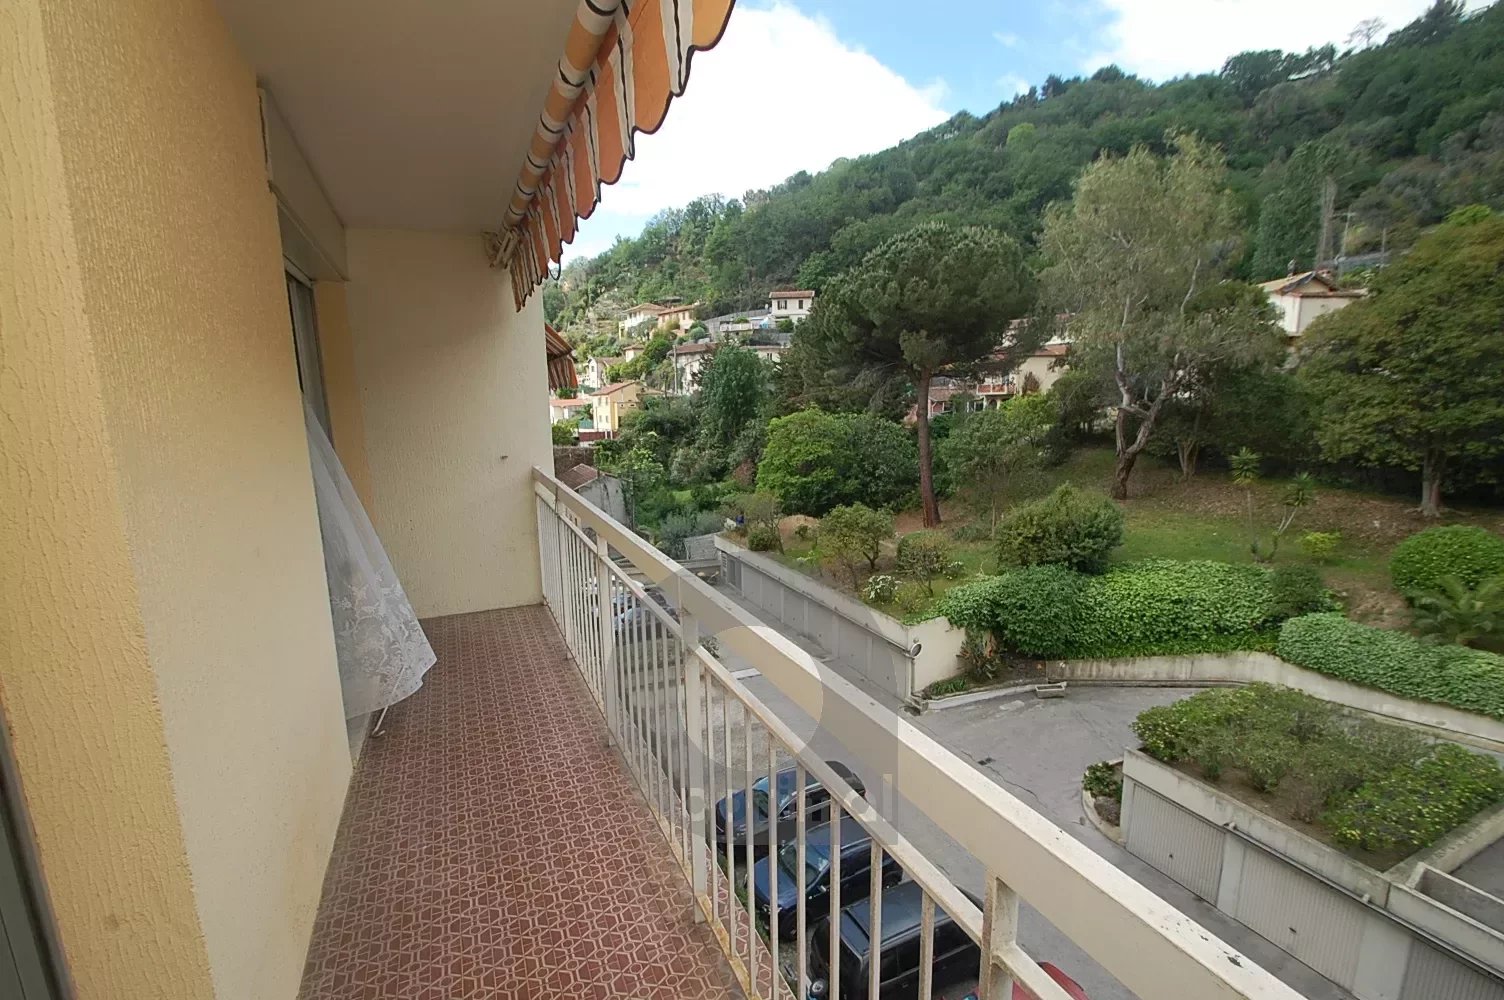 MENTON CAREI - TWO BEDROOMS APARTMENT WITH GARAGE AND CELLAR